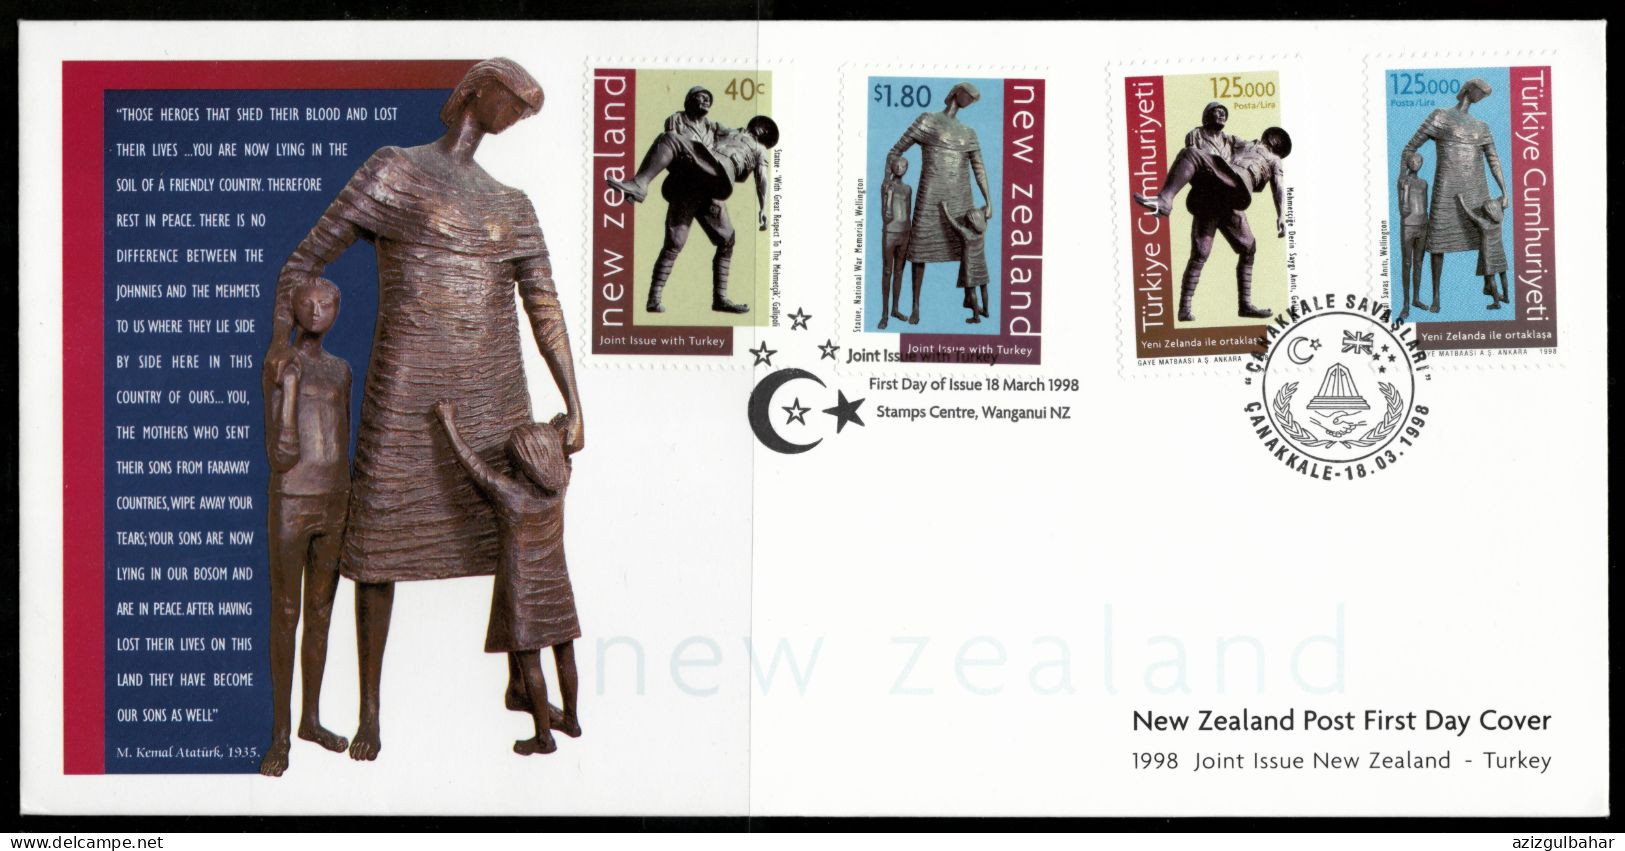 TURKEY - 1998 - JOINT ISSUE NEW ZEALAND TURKEY - 18 MARCH 1998 - FDC - FDC